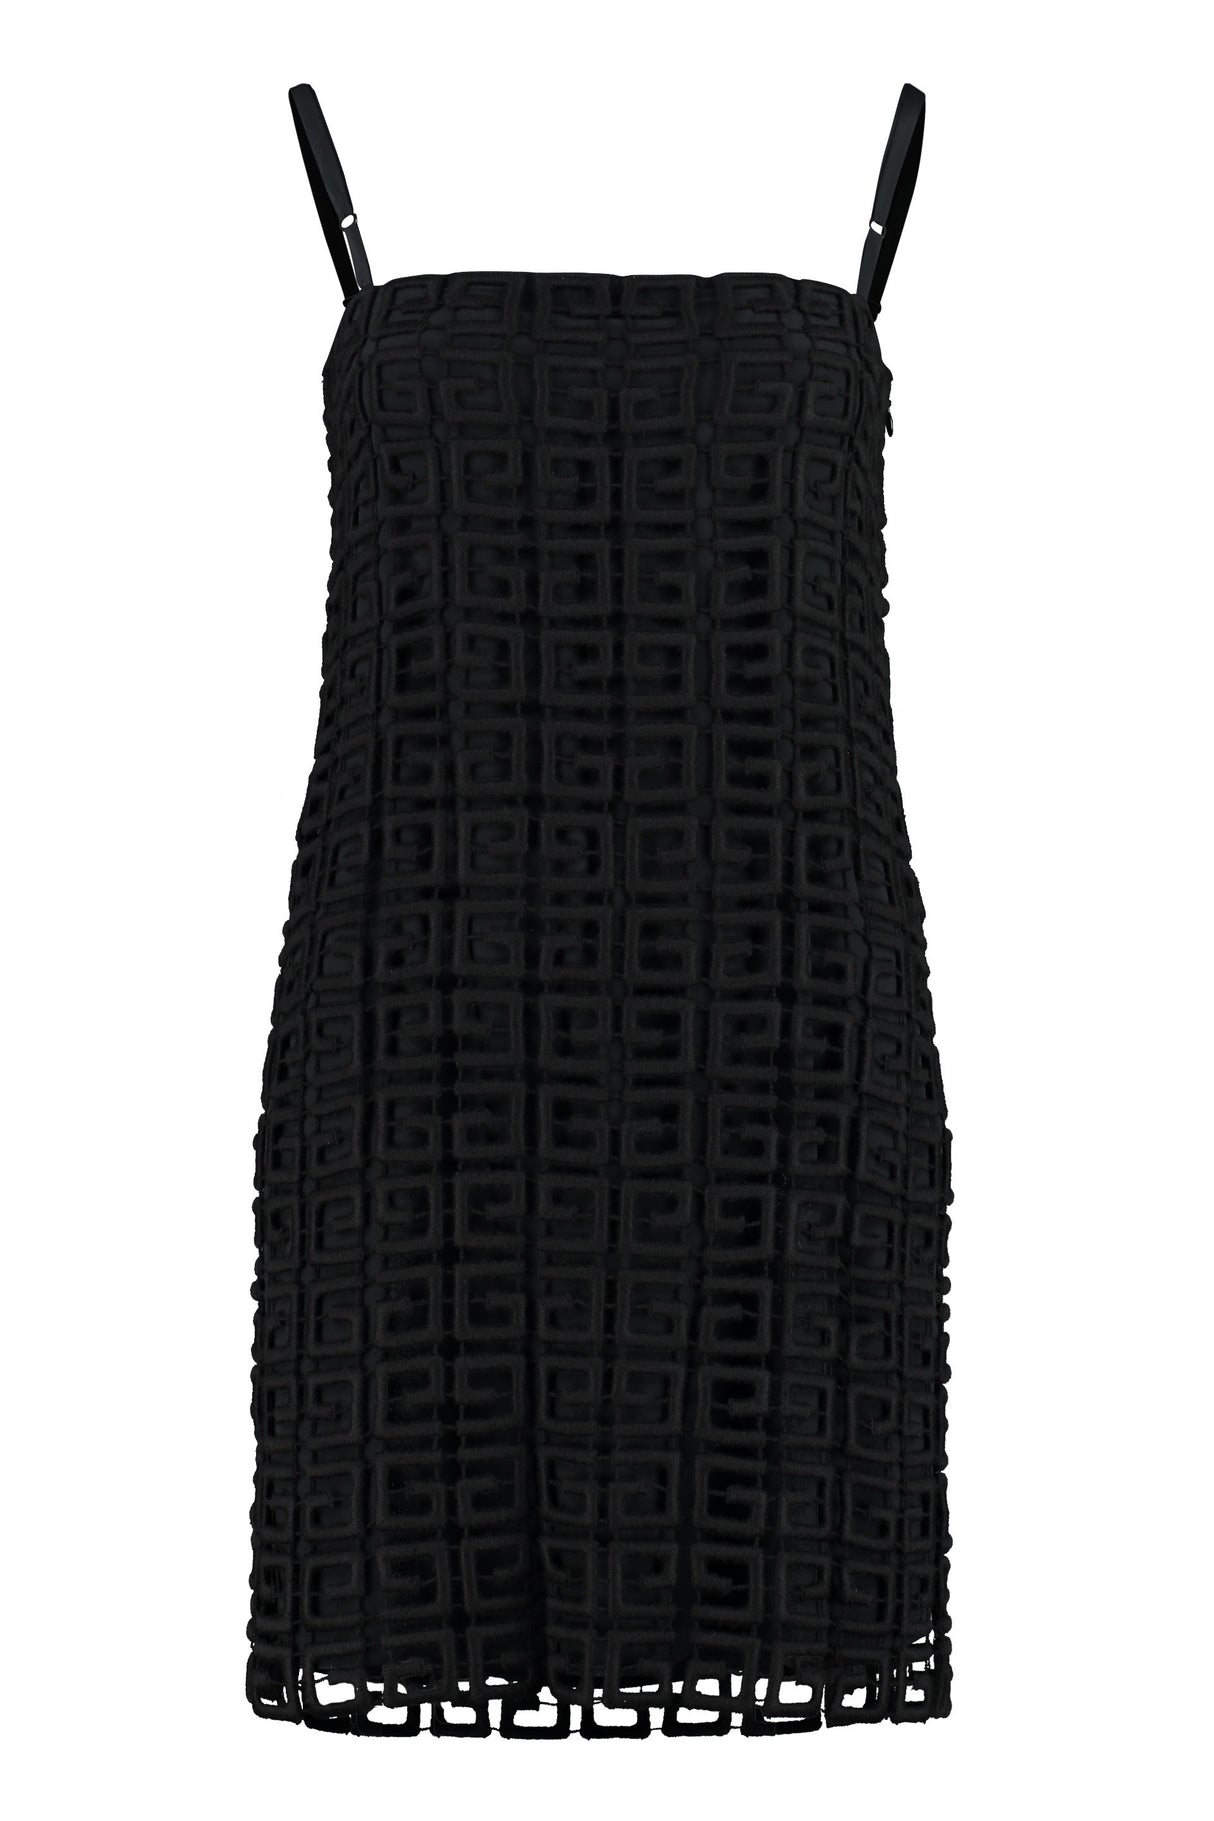 GIVENCHY Stylish Black Knit Dress with Adjustable Straps and Coordinated Slip